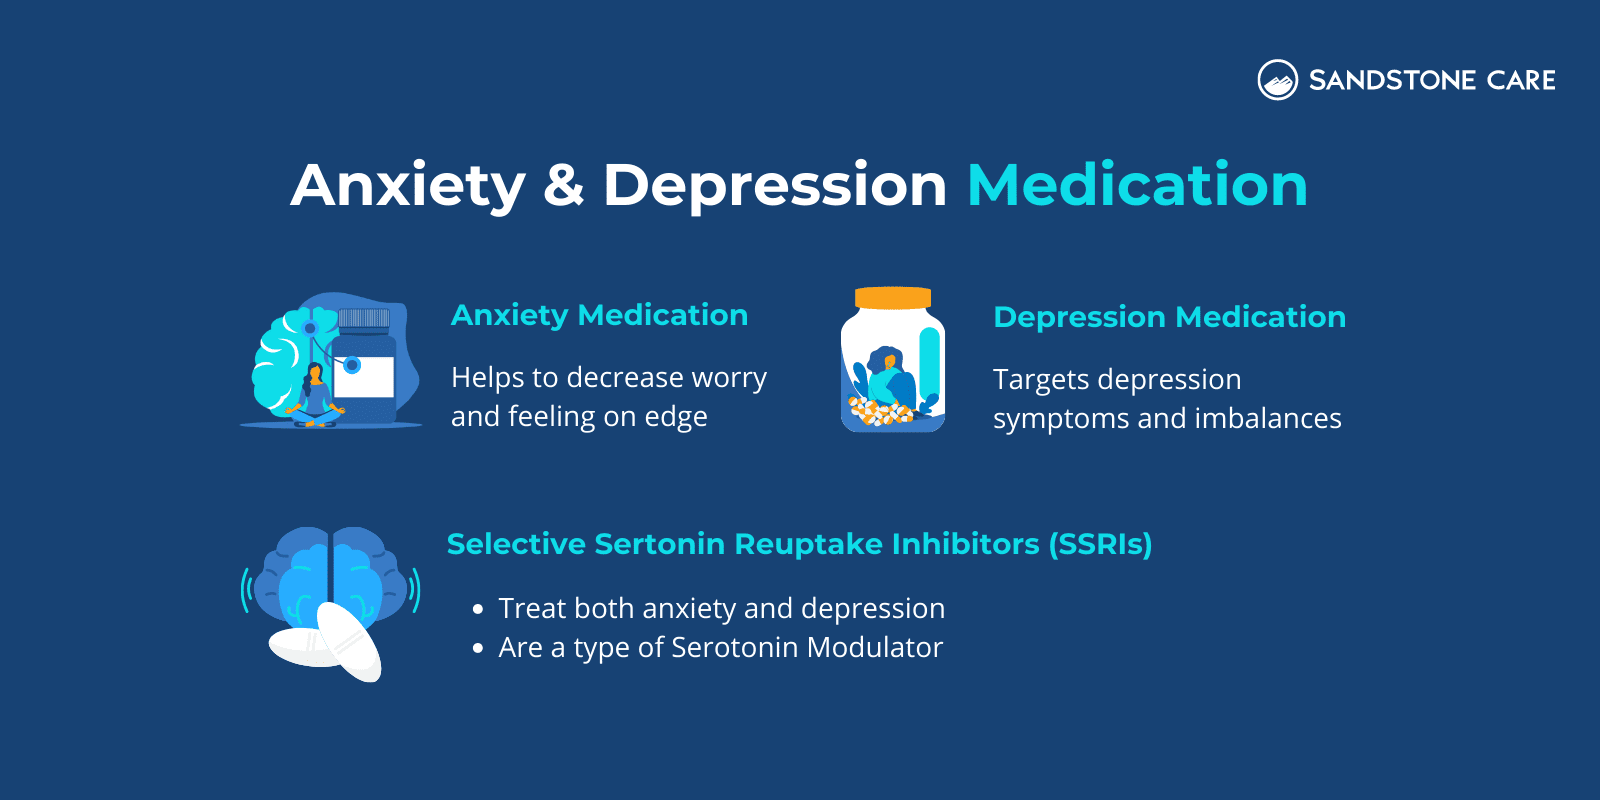 "Anxiety and depression medication" is broken down into 3 categories of anxiety medication, depression medication, and SSRIs which treats both